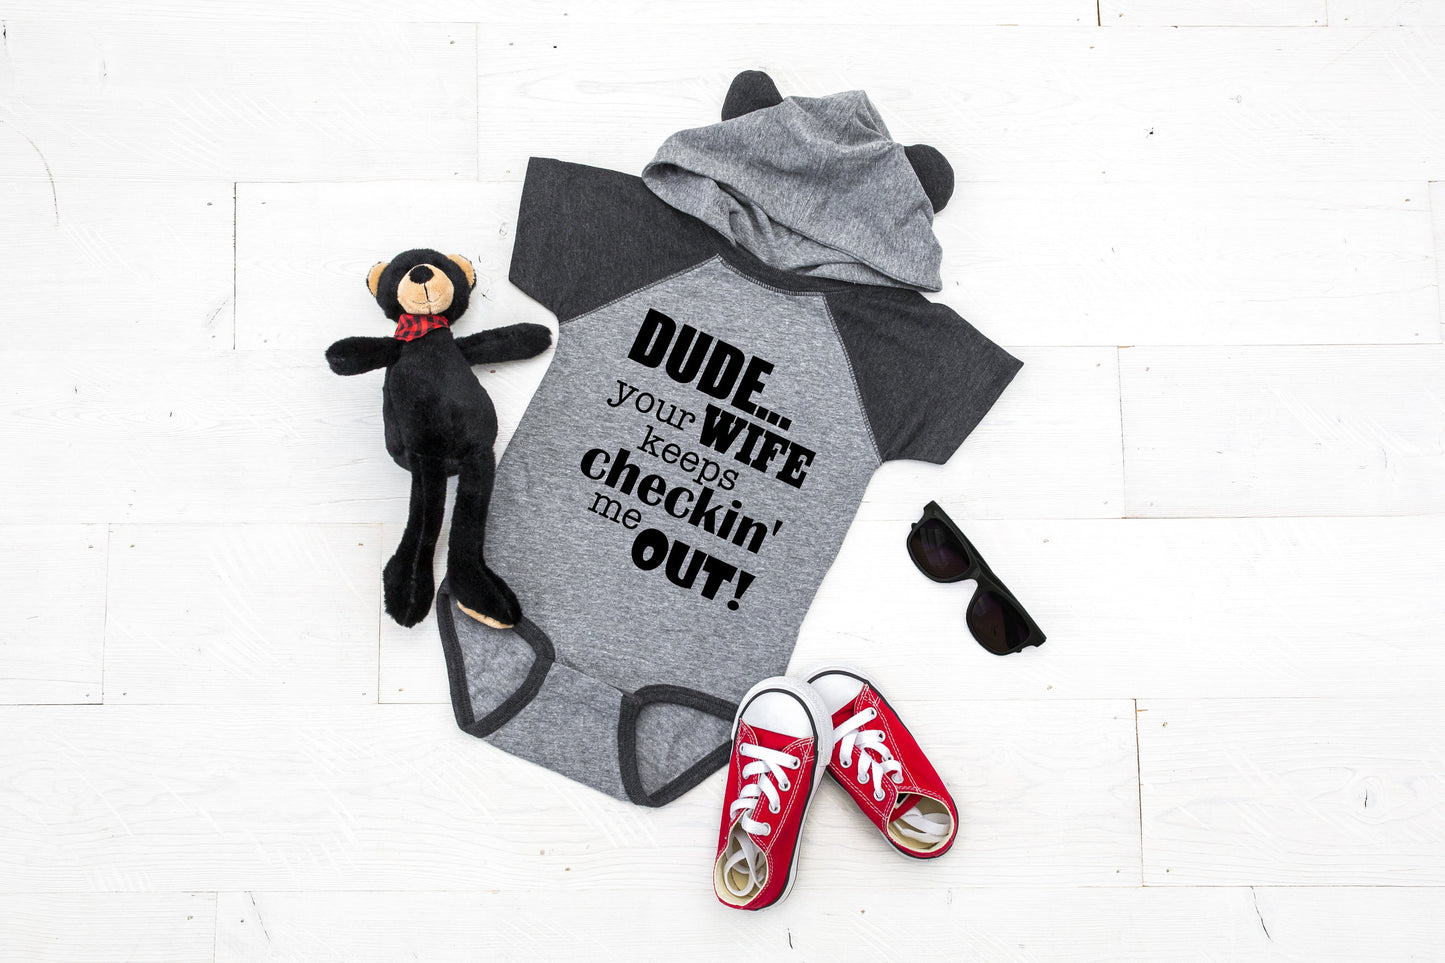 Dude Your Wife Keeps Checkin Me Out Bear Ears Hoodie Infant Bodysuit - baby bear bodysuit - cute baby clothes - baby boy gift